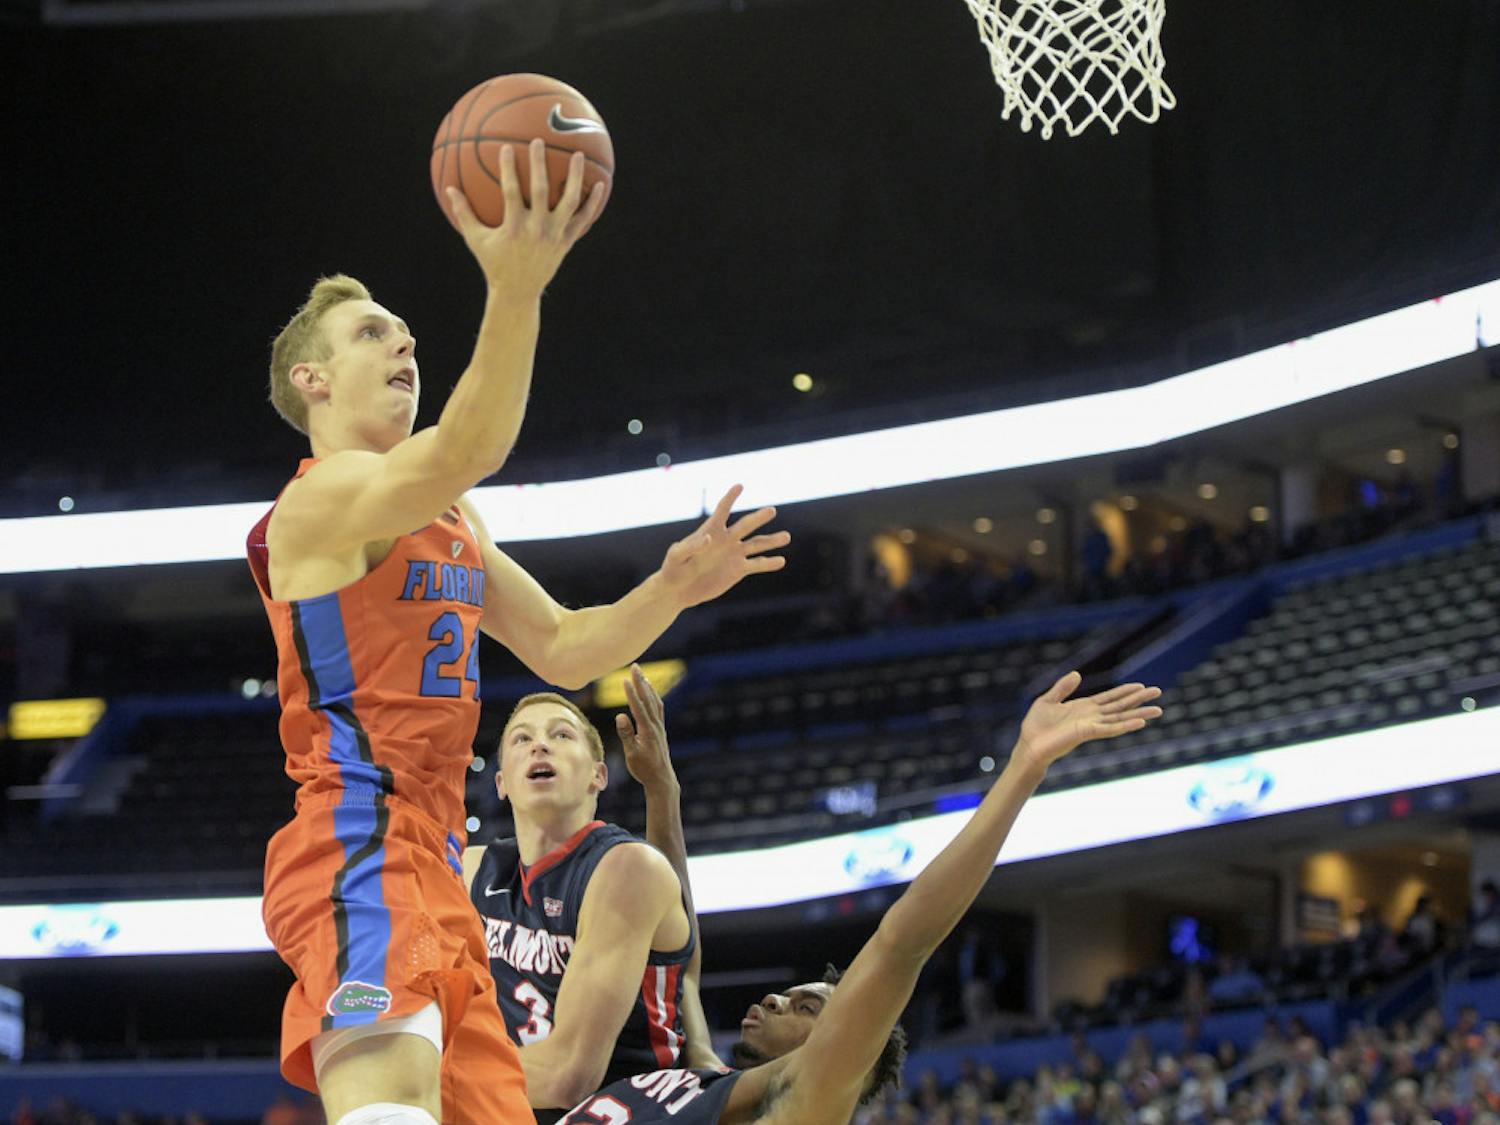 Florida guard Canyon Barry (24) drives to the basket over Belmont forward Amanze Egekeze (32) and guard Dylan Windler (3) in the first half of an NCAA college basketball game in Tampa, Fla., on Monday, Nov/ 21, 2016. (Andres Leiva/Tampa Bay Times via AP)